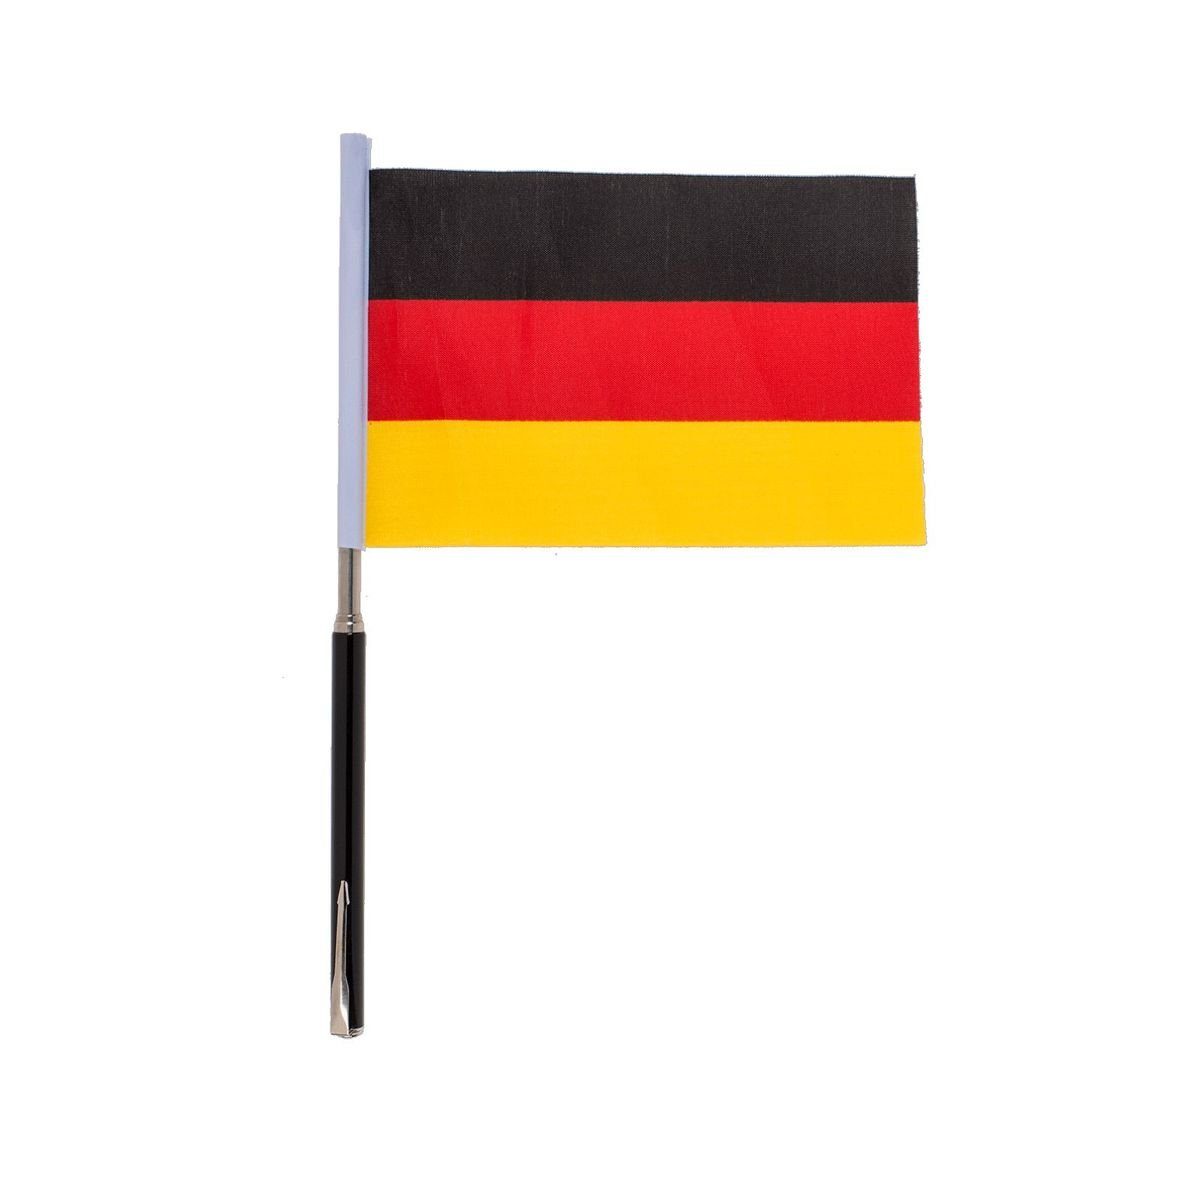 Out of the Blue Flagge Deutschlandflagge Fahne mit Metall-Ösen ca